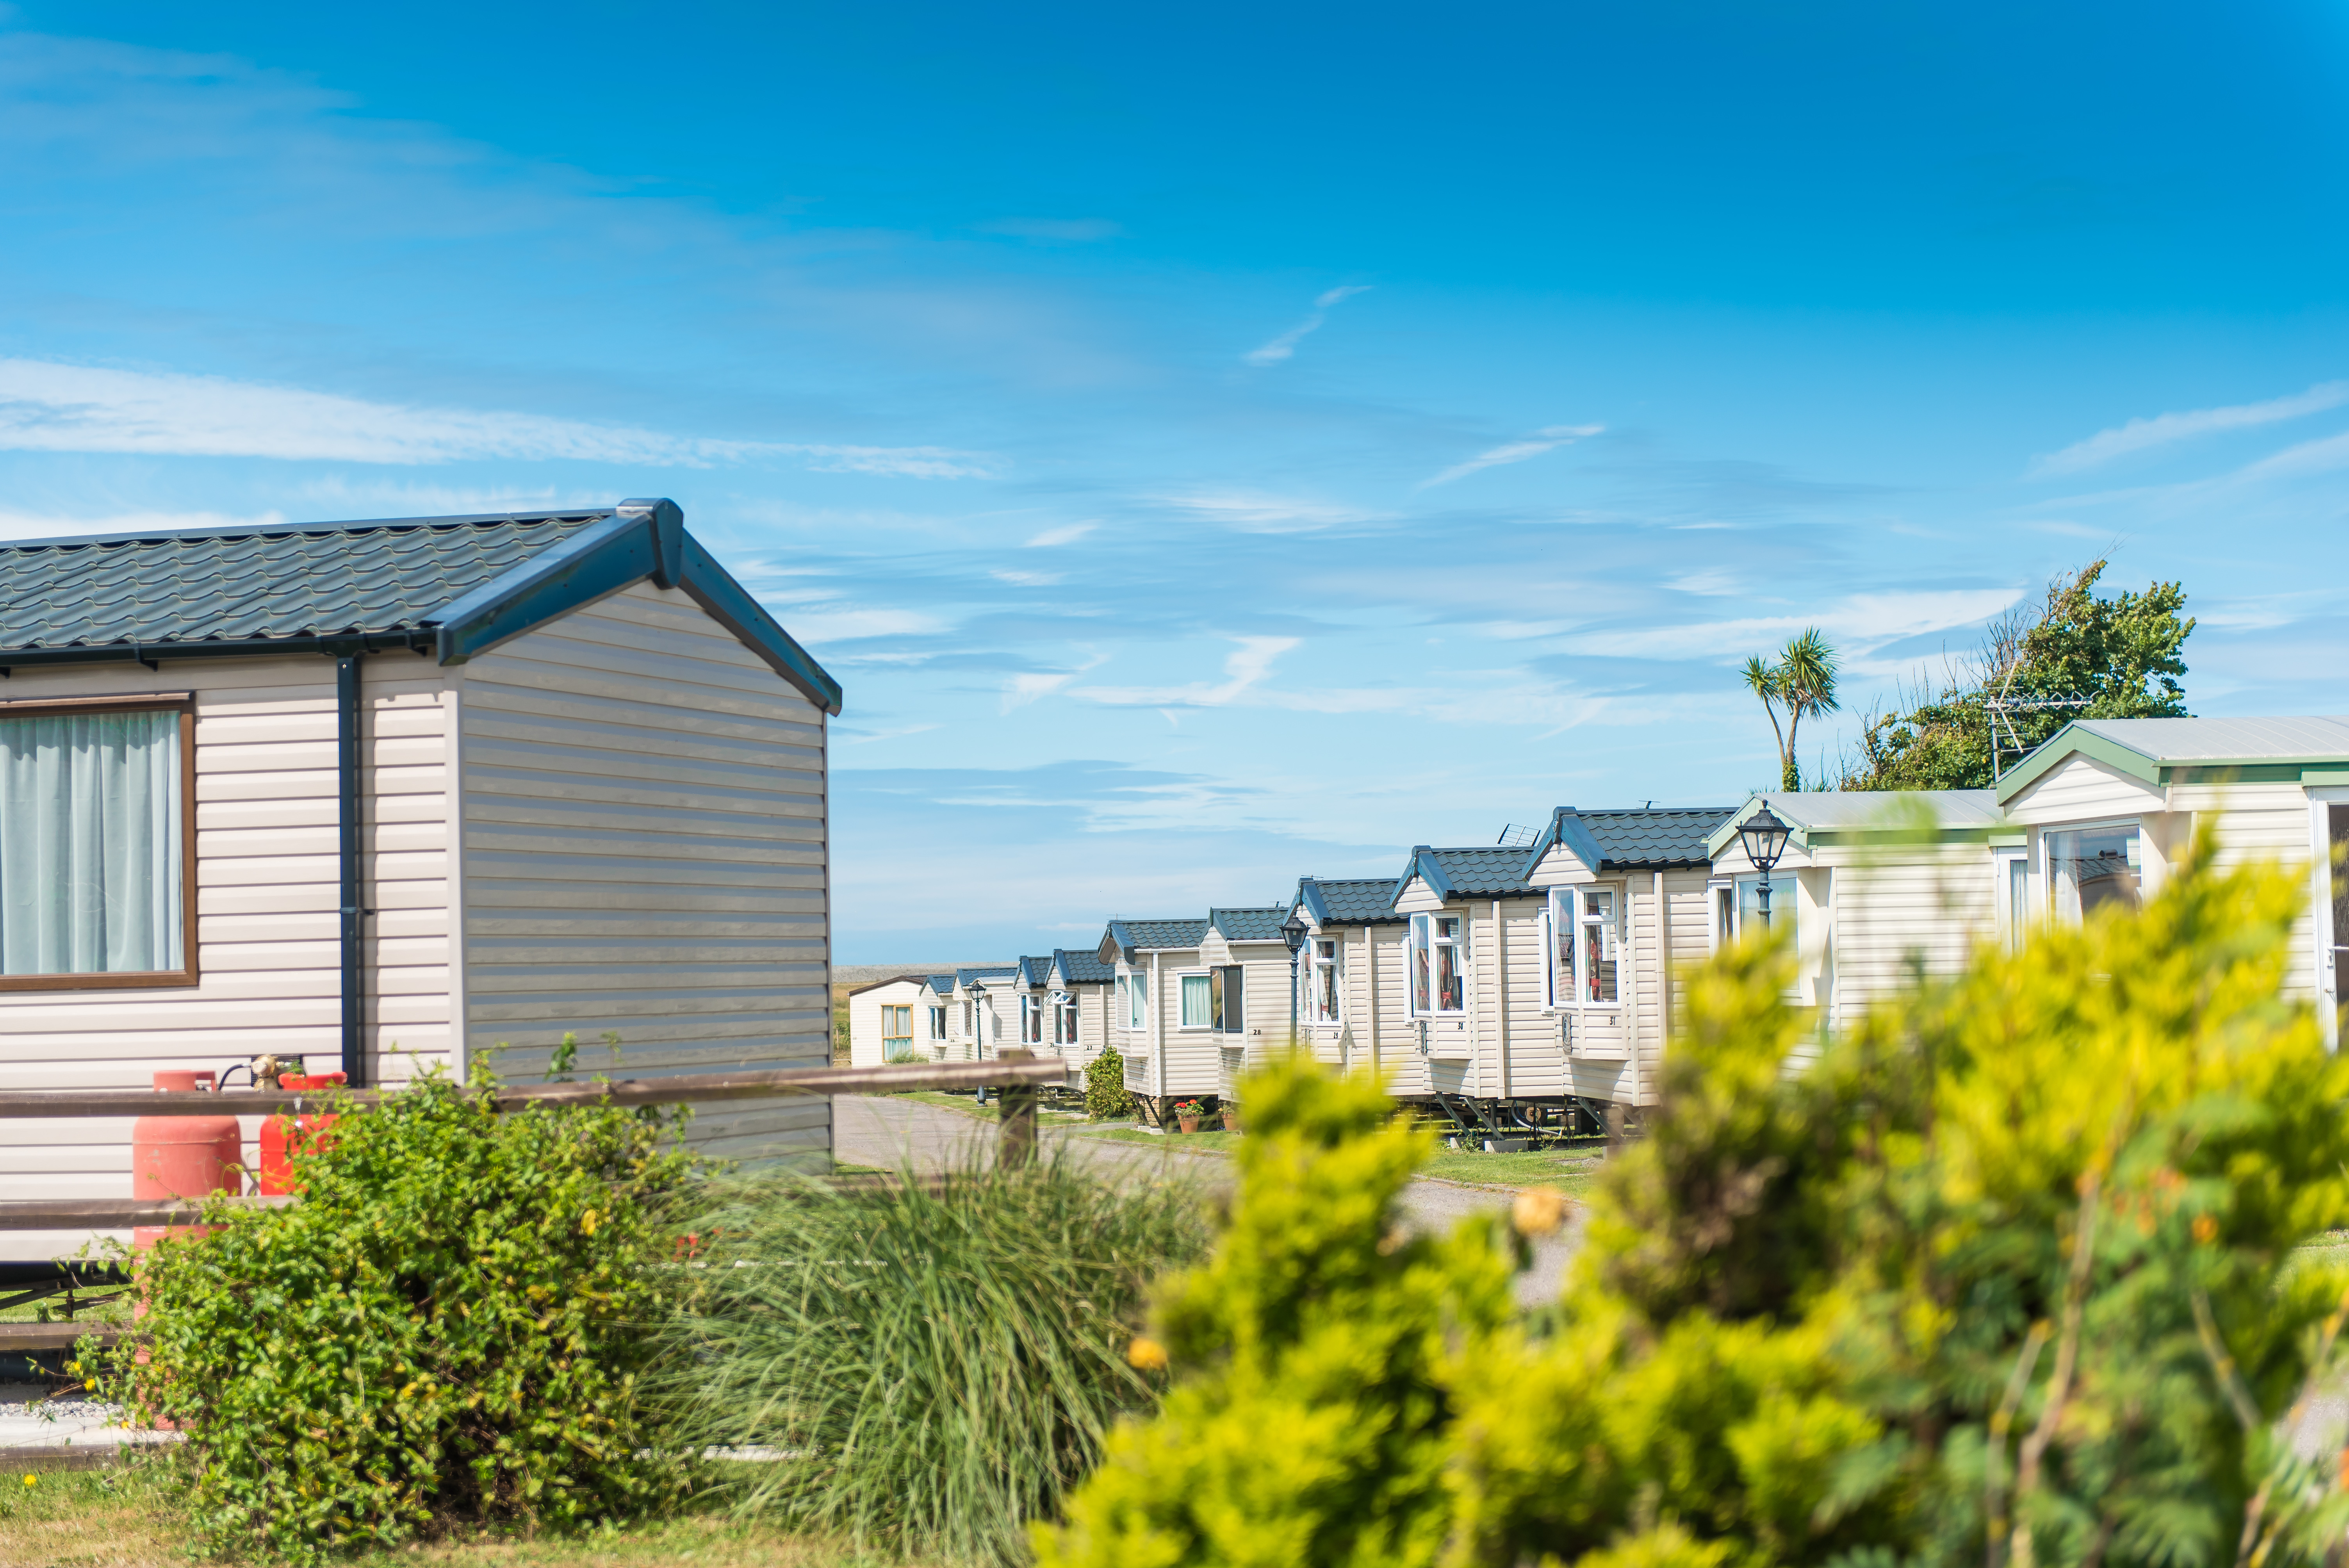 sell your static caravan to Surf Bay Leisure